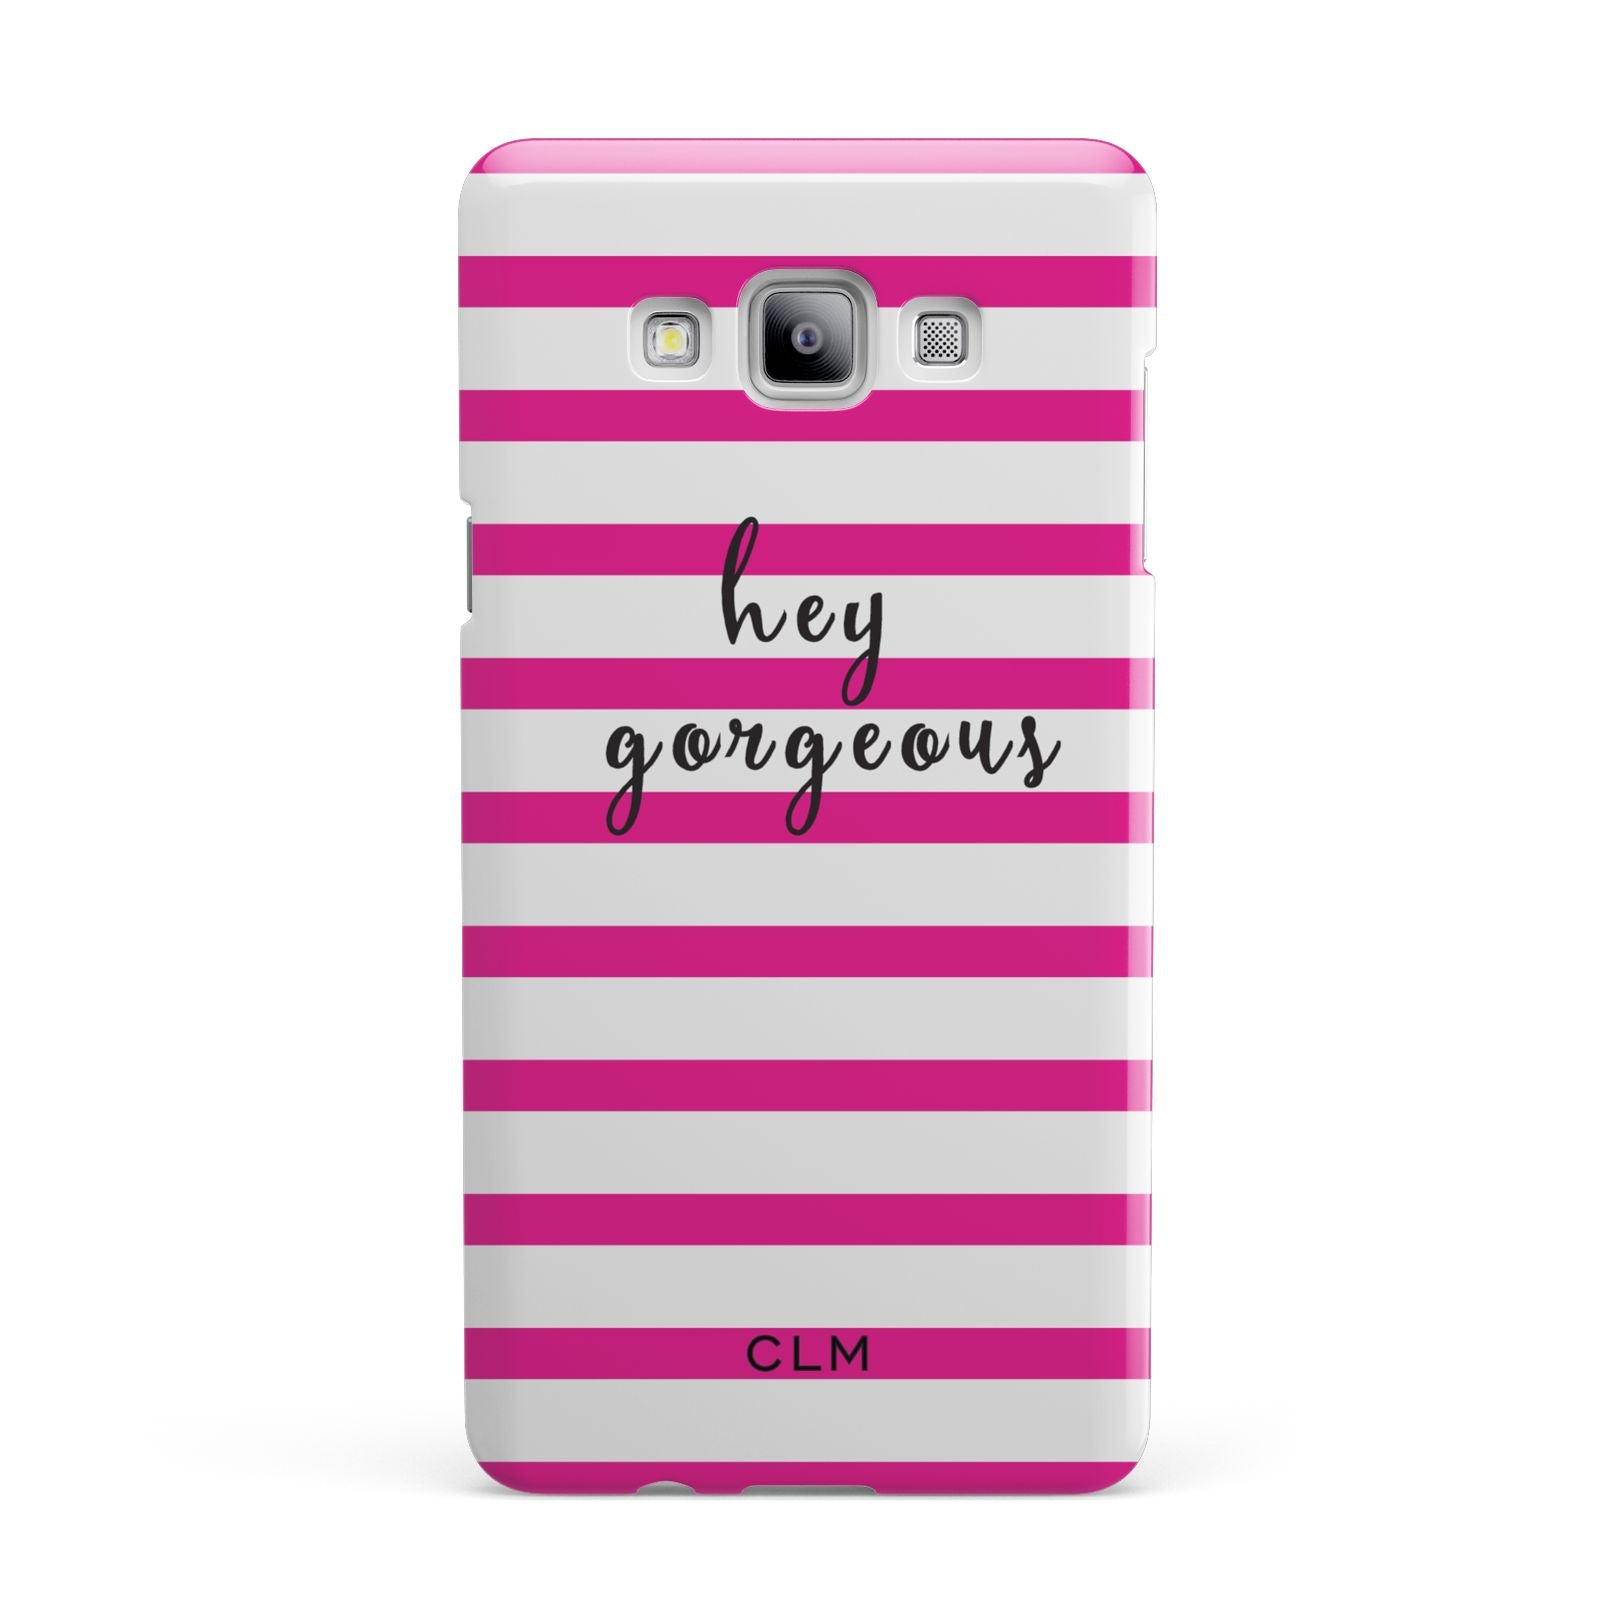 Personalised Initials Pink Striped Samsung Galaxy A7 2015 Case